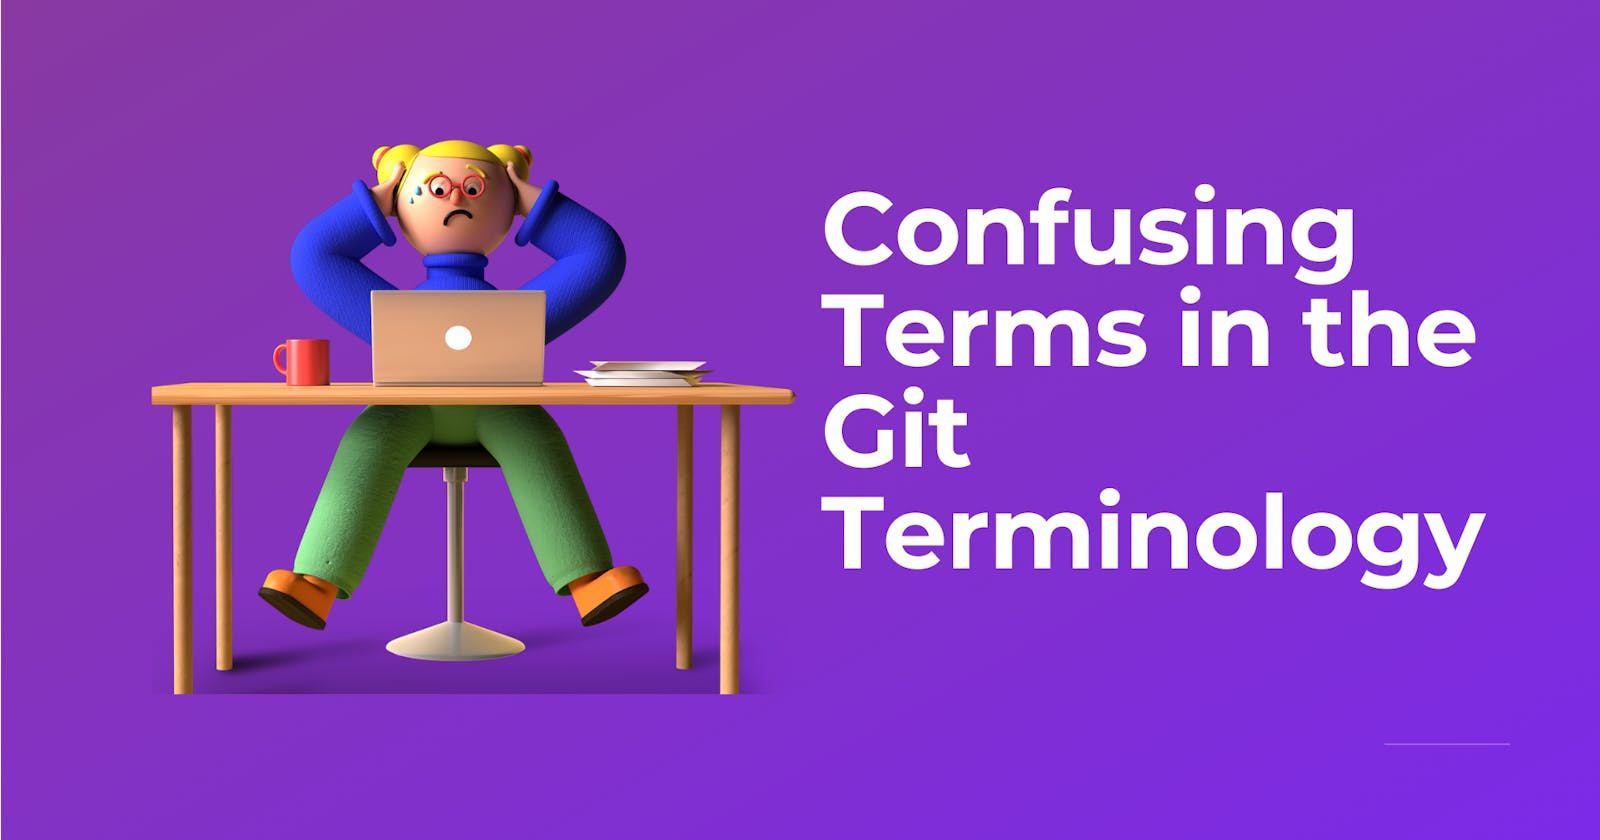 Confusing Terms in the Git Terminology